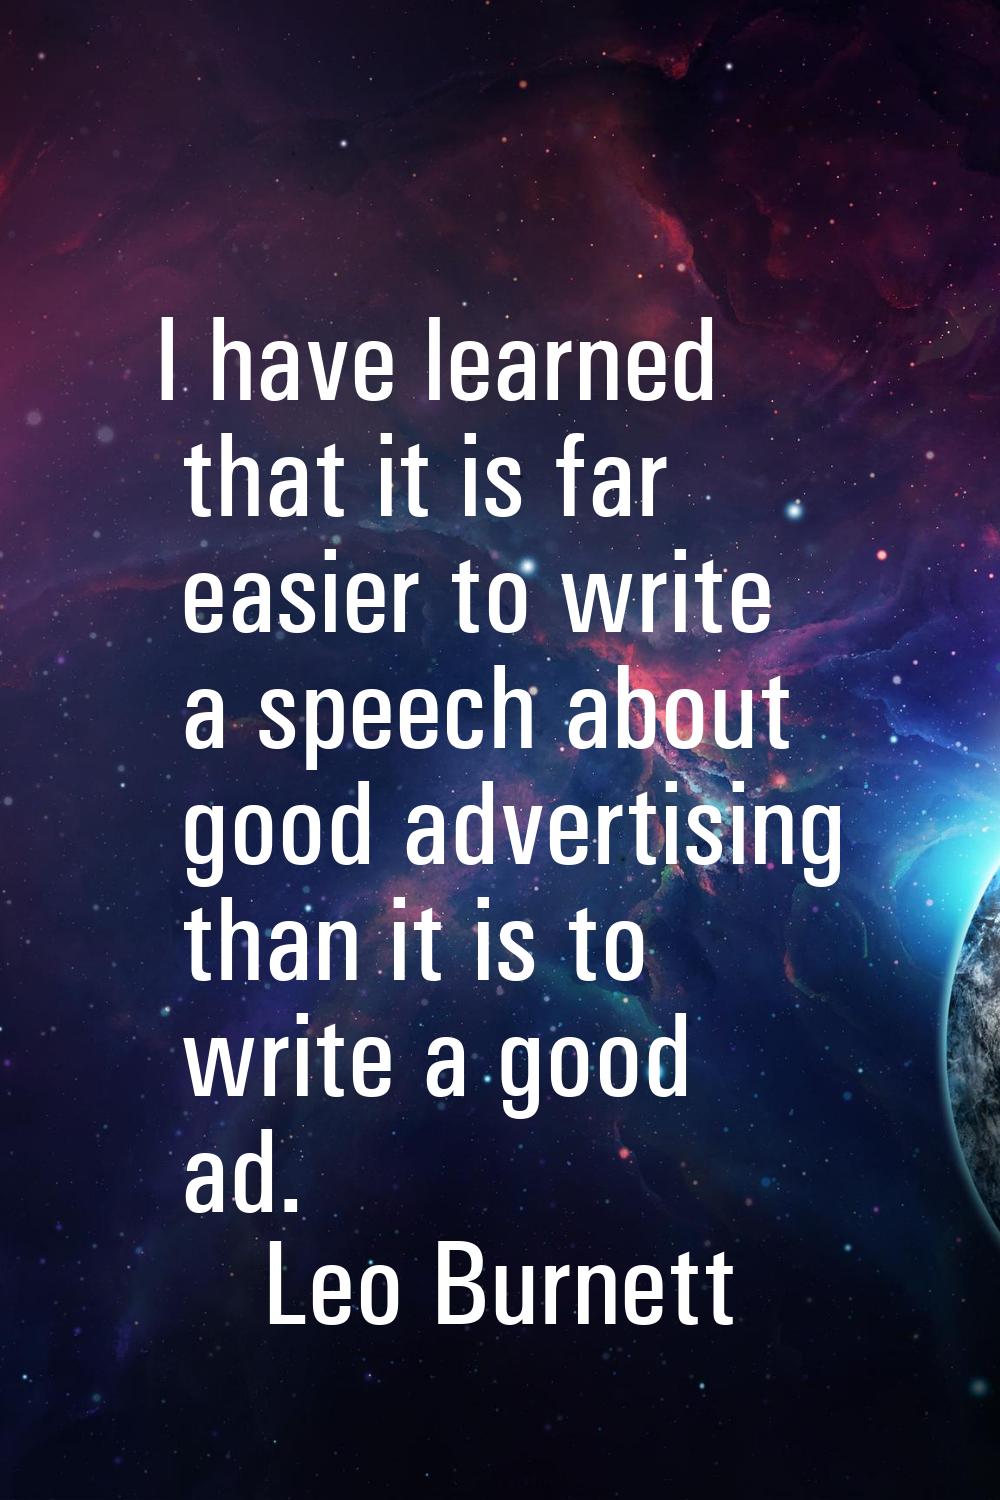 I have learned that it is far easier to write a speech about good advertising than it is to write a